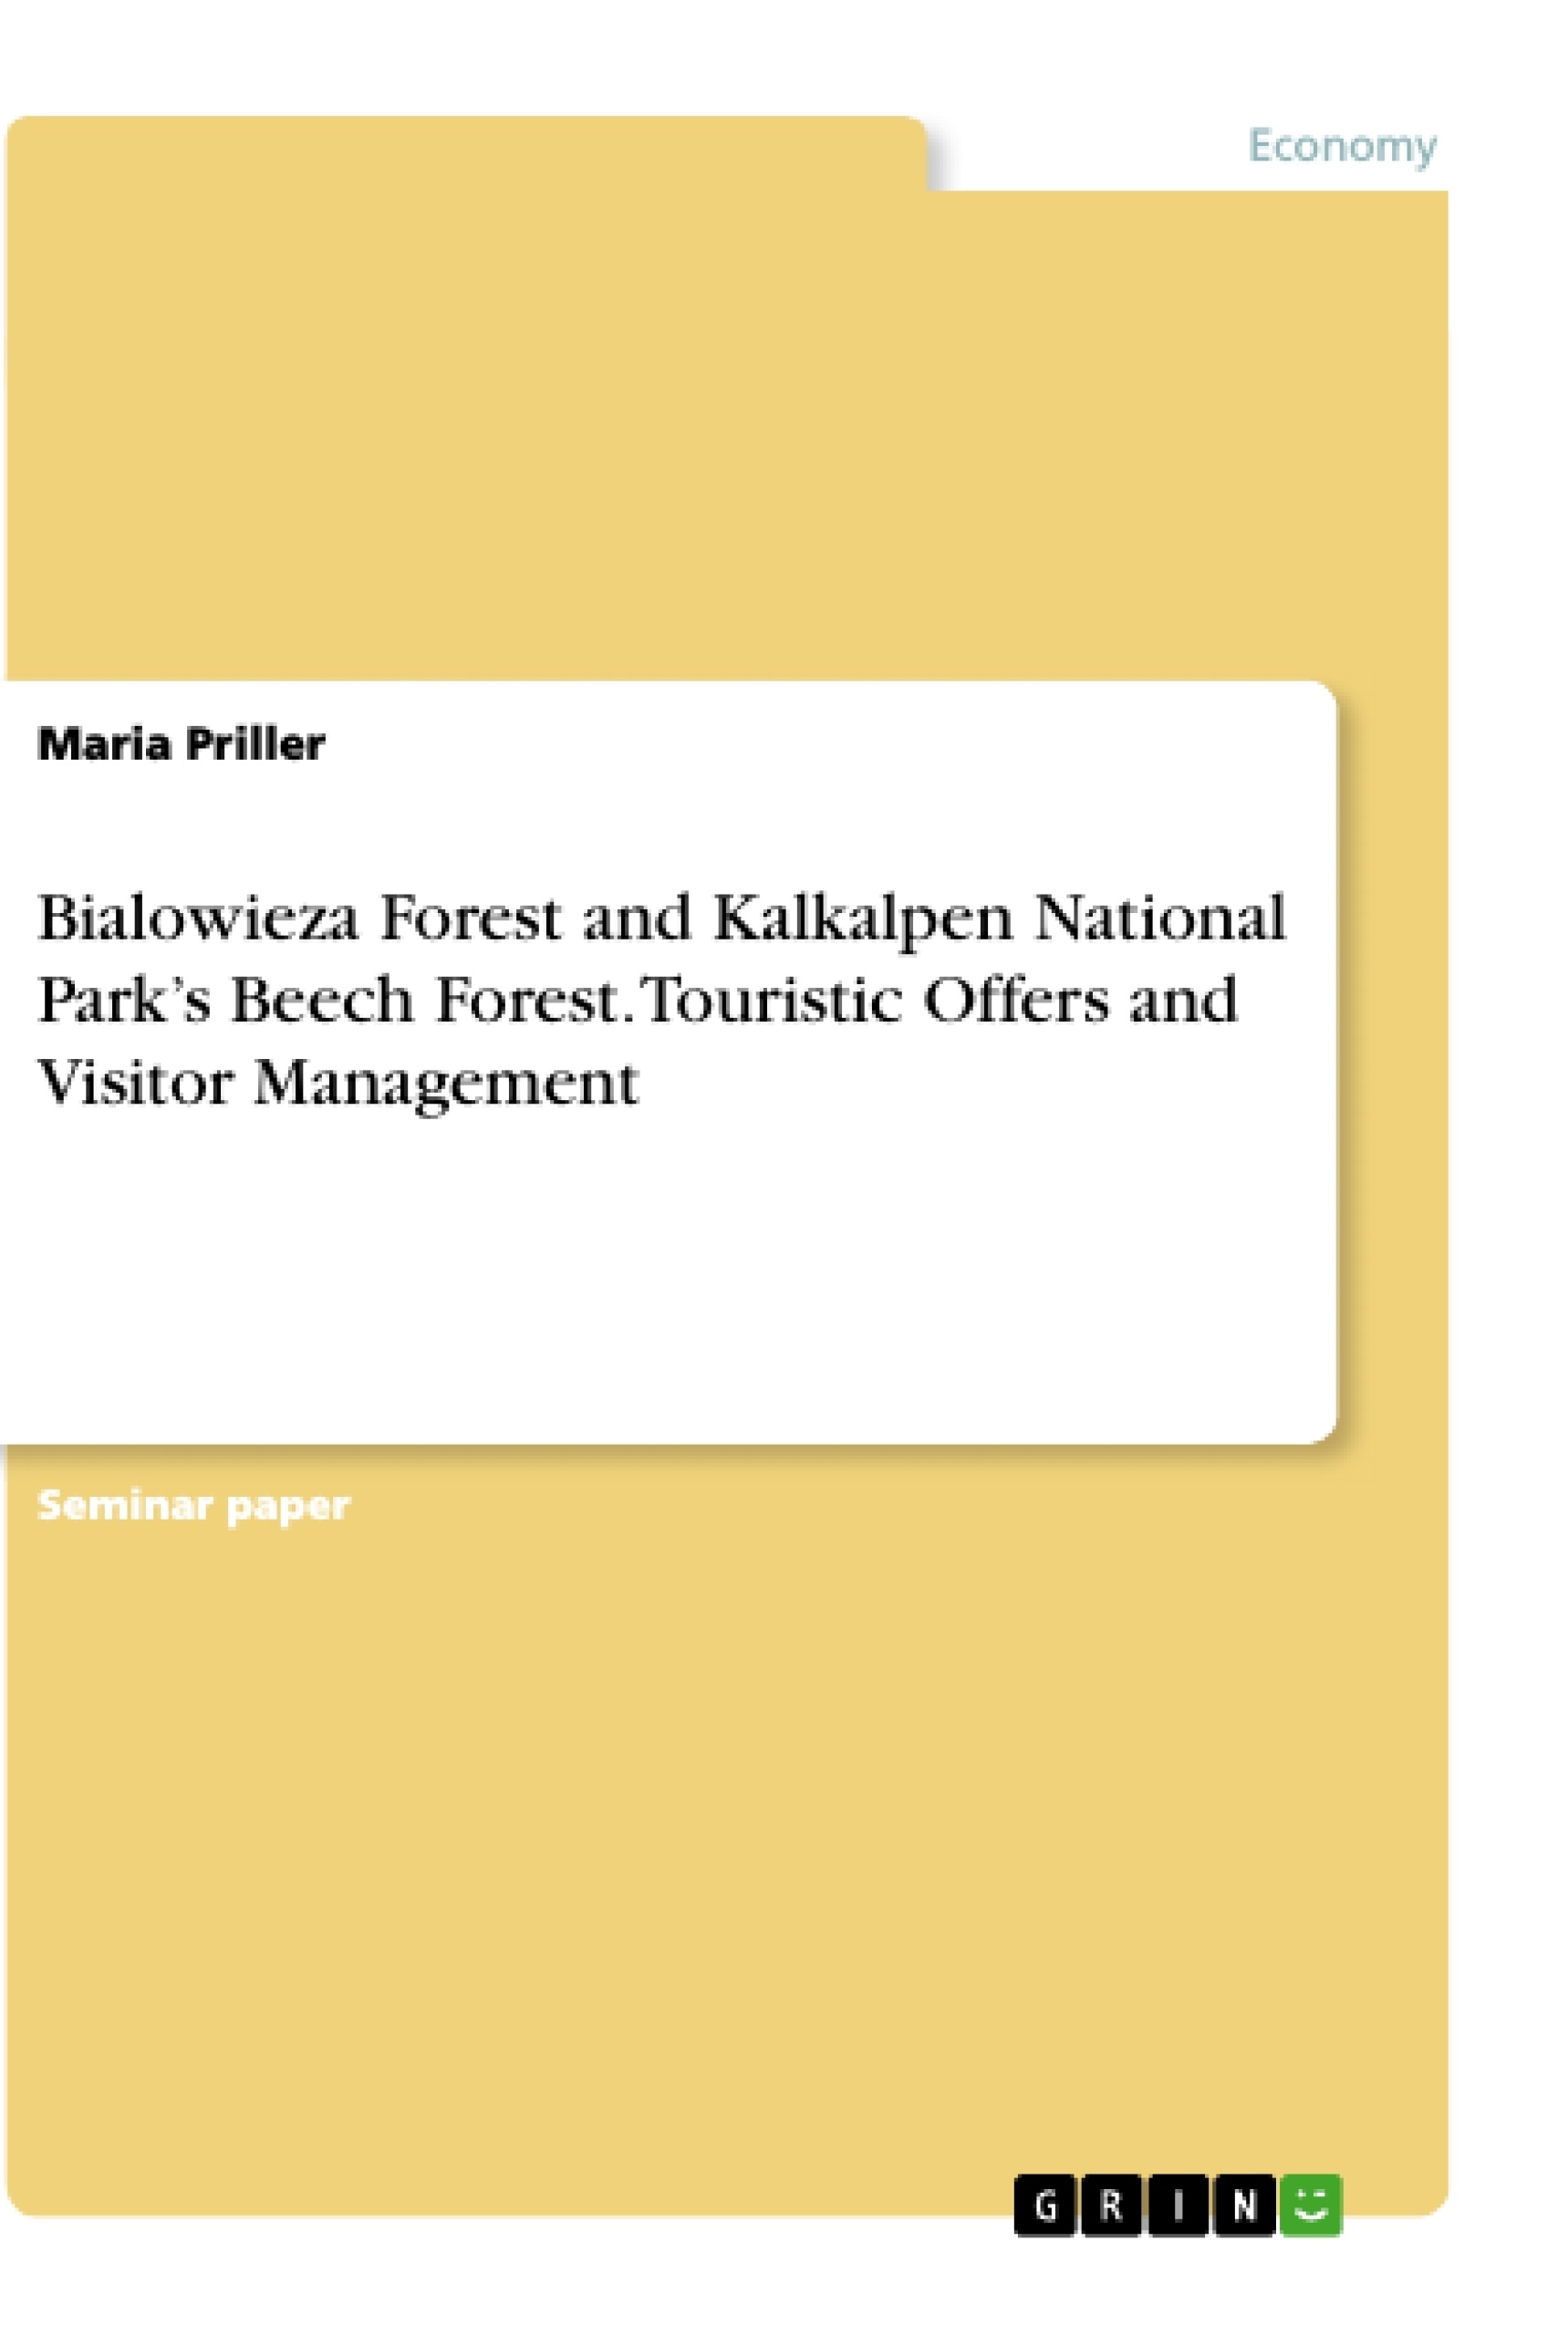 Titre: Bialowieza Forest and Kalkalpen National Park’s Beech Forest. Touristic Offers and Visitor Management